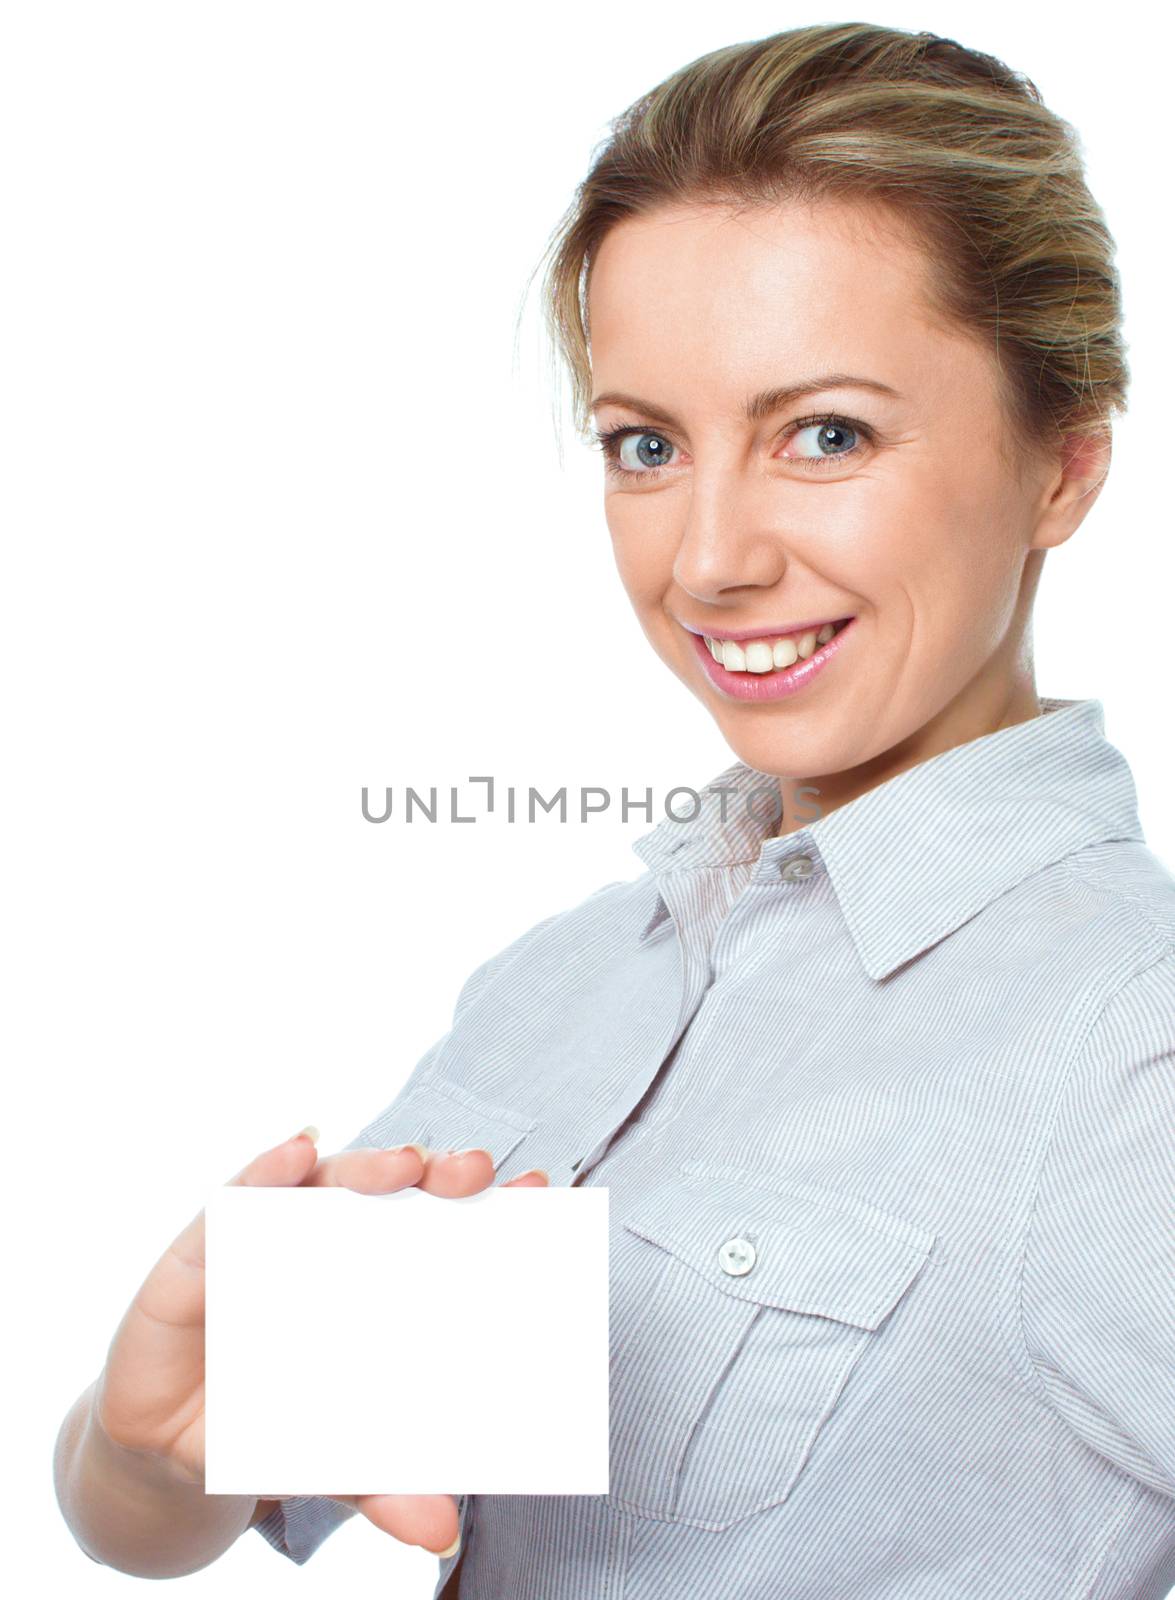 Attractive young woman showing empty blank paper card sign with copy space for text, isolated over white